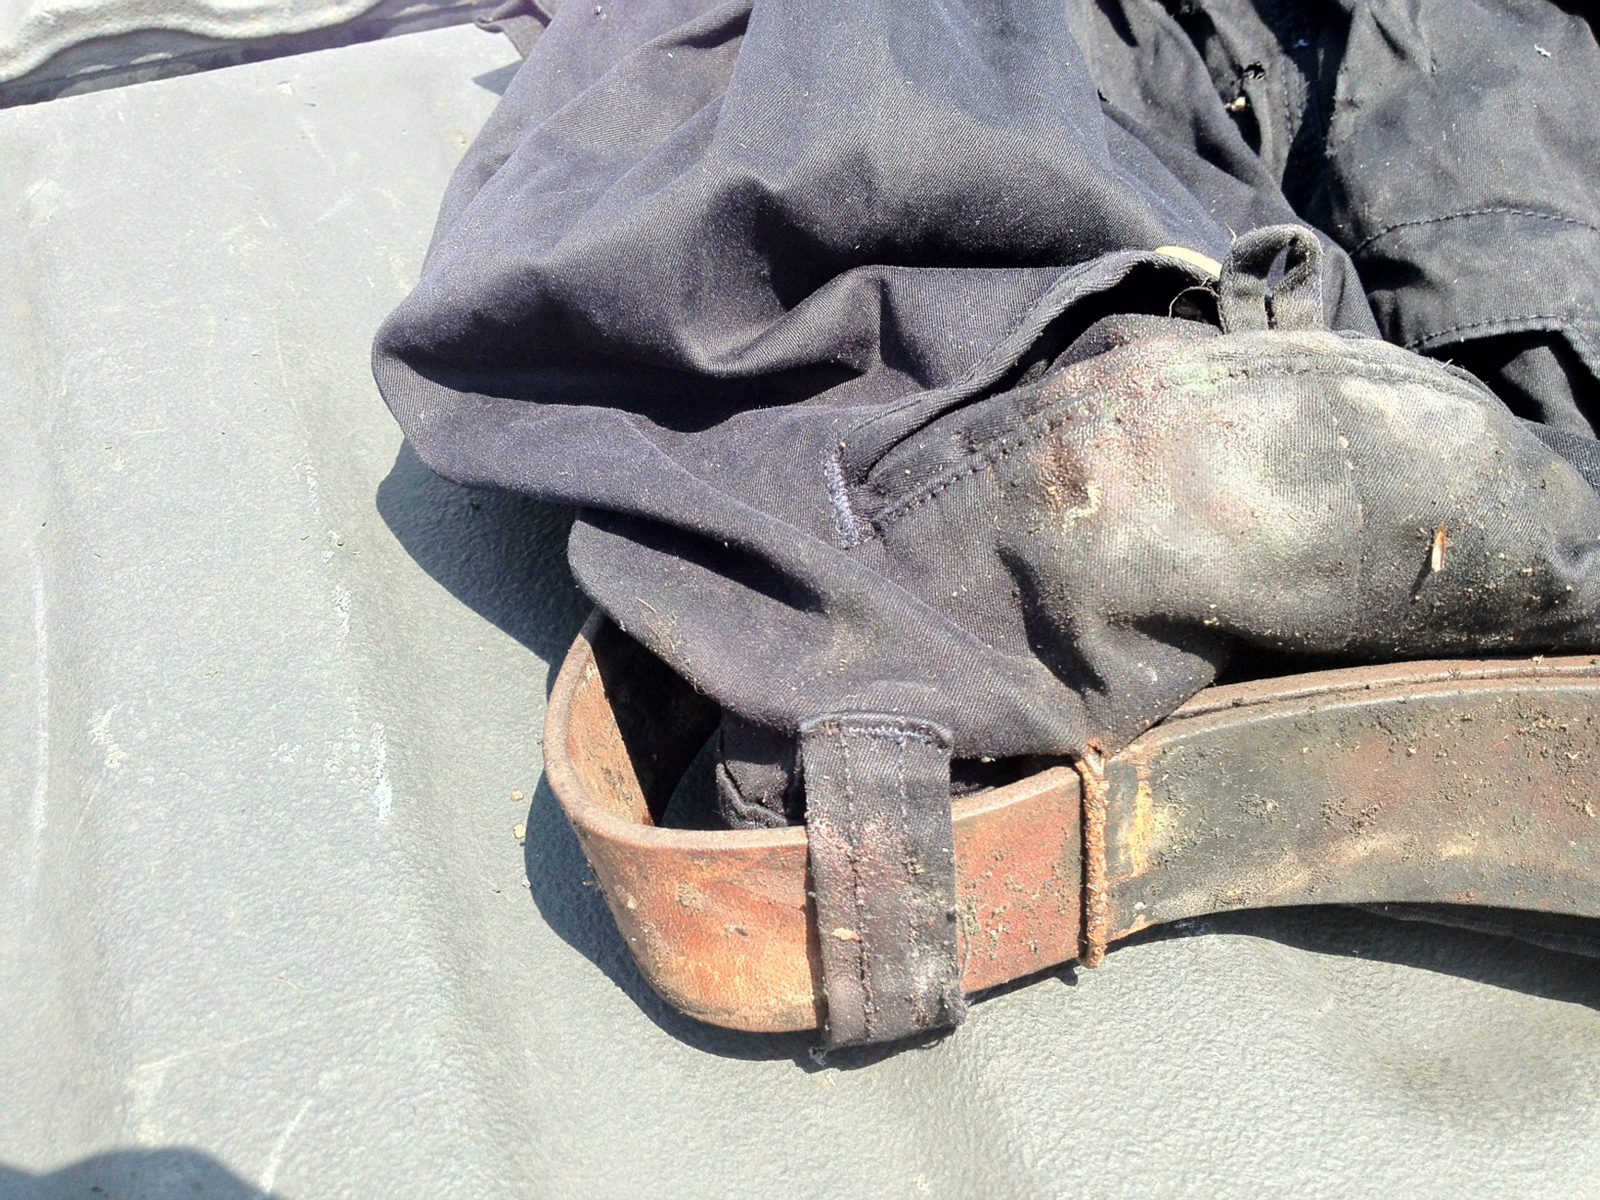 Worn and moldy No. 5 Cinch Belt, looped through belt loops on dirty pants, rusted hardware